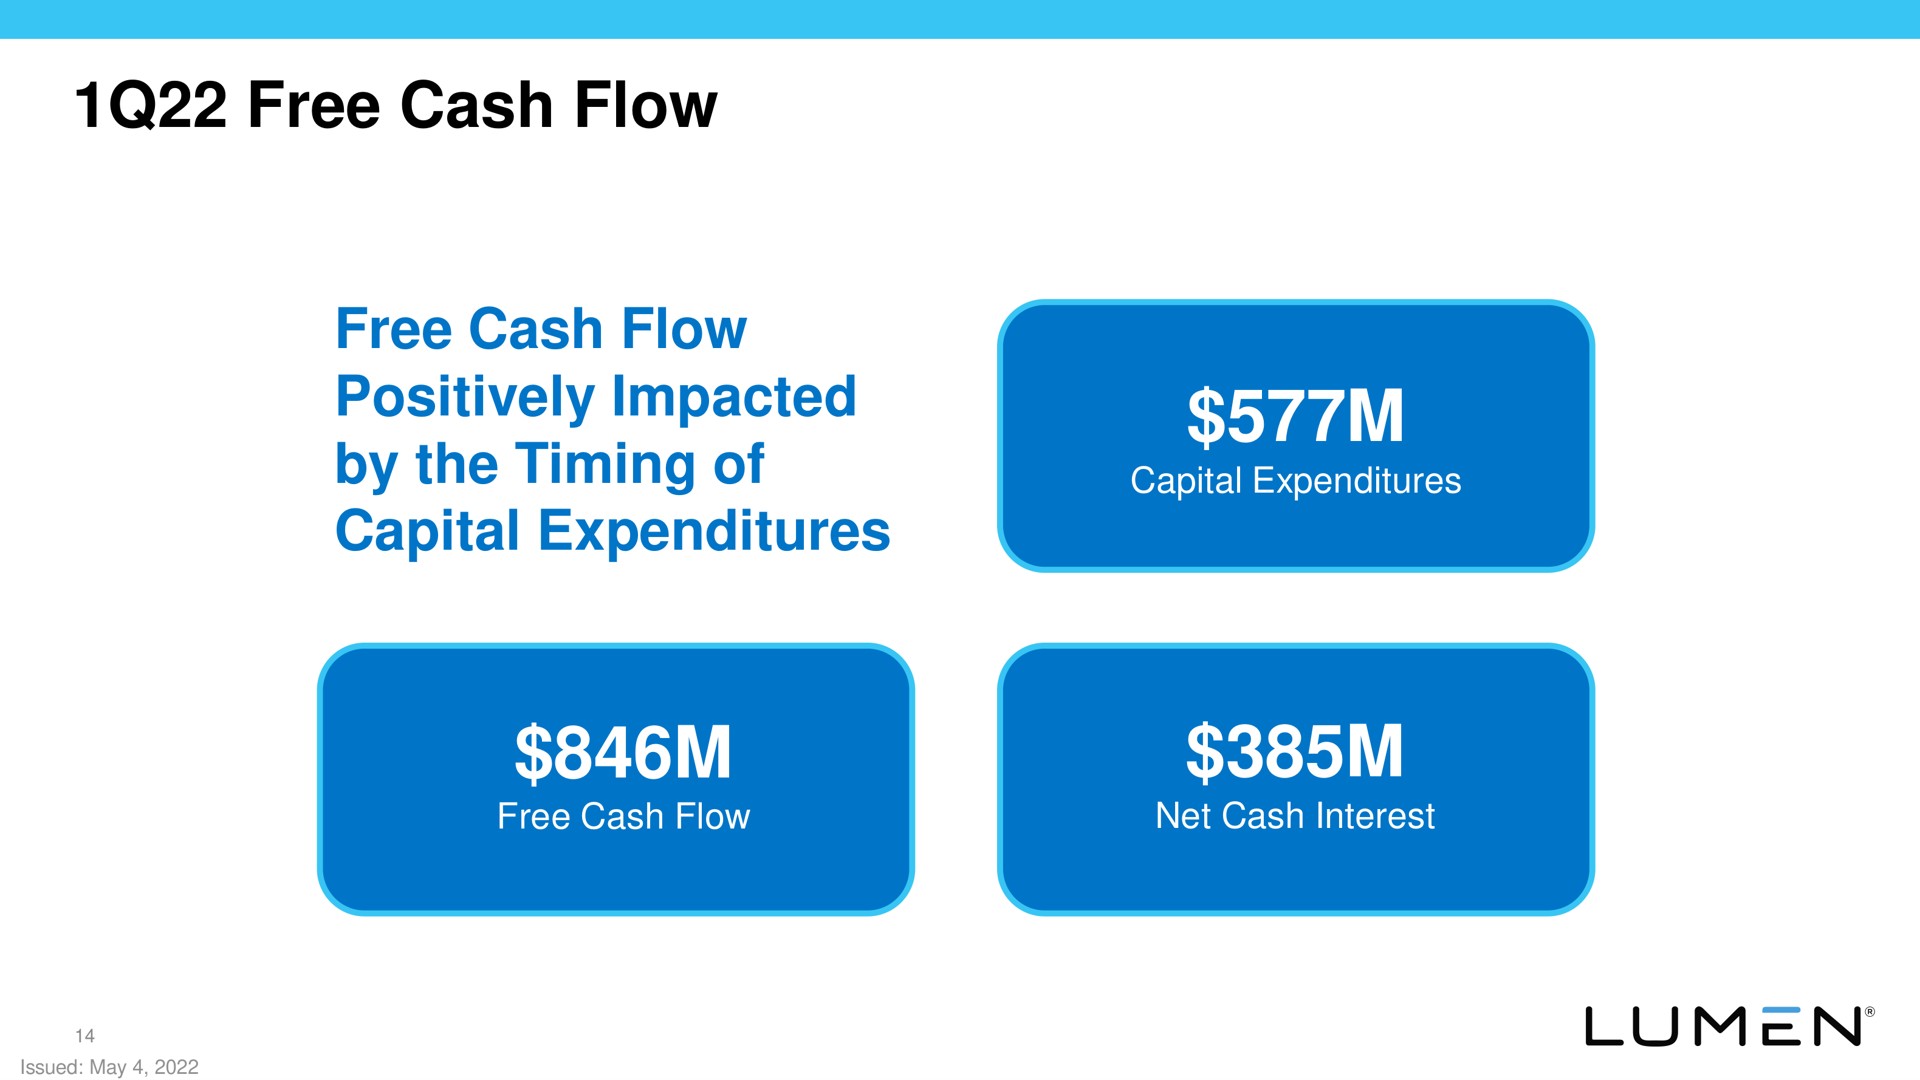 free cash flow free cash flow positively impacted by the timing of capital expenditures to | Lumen